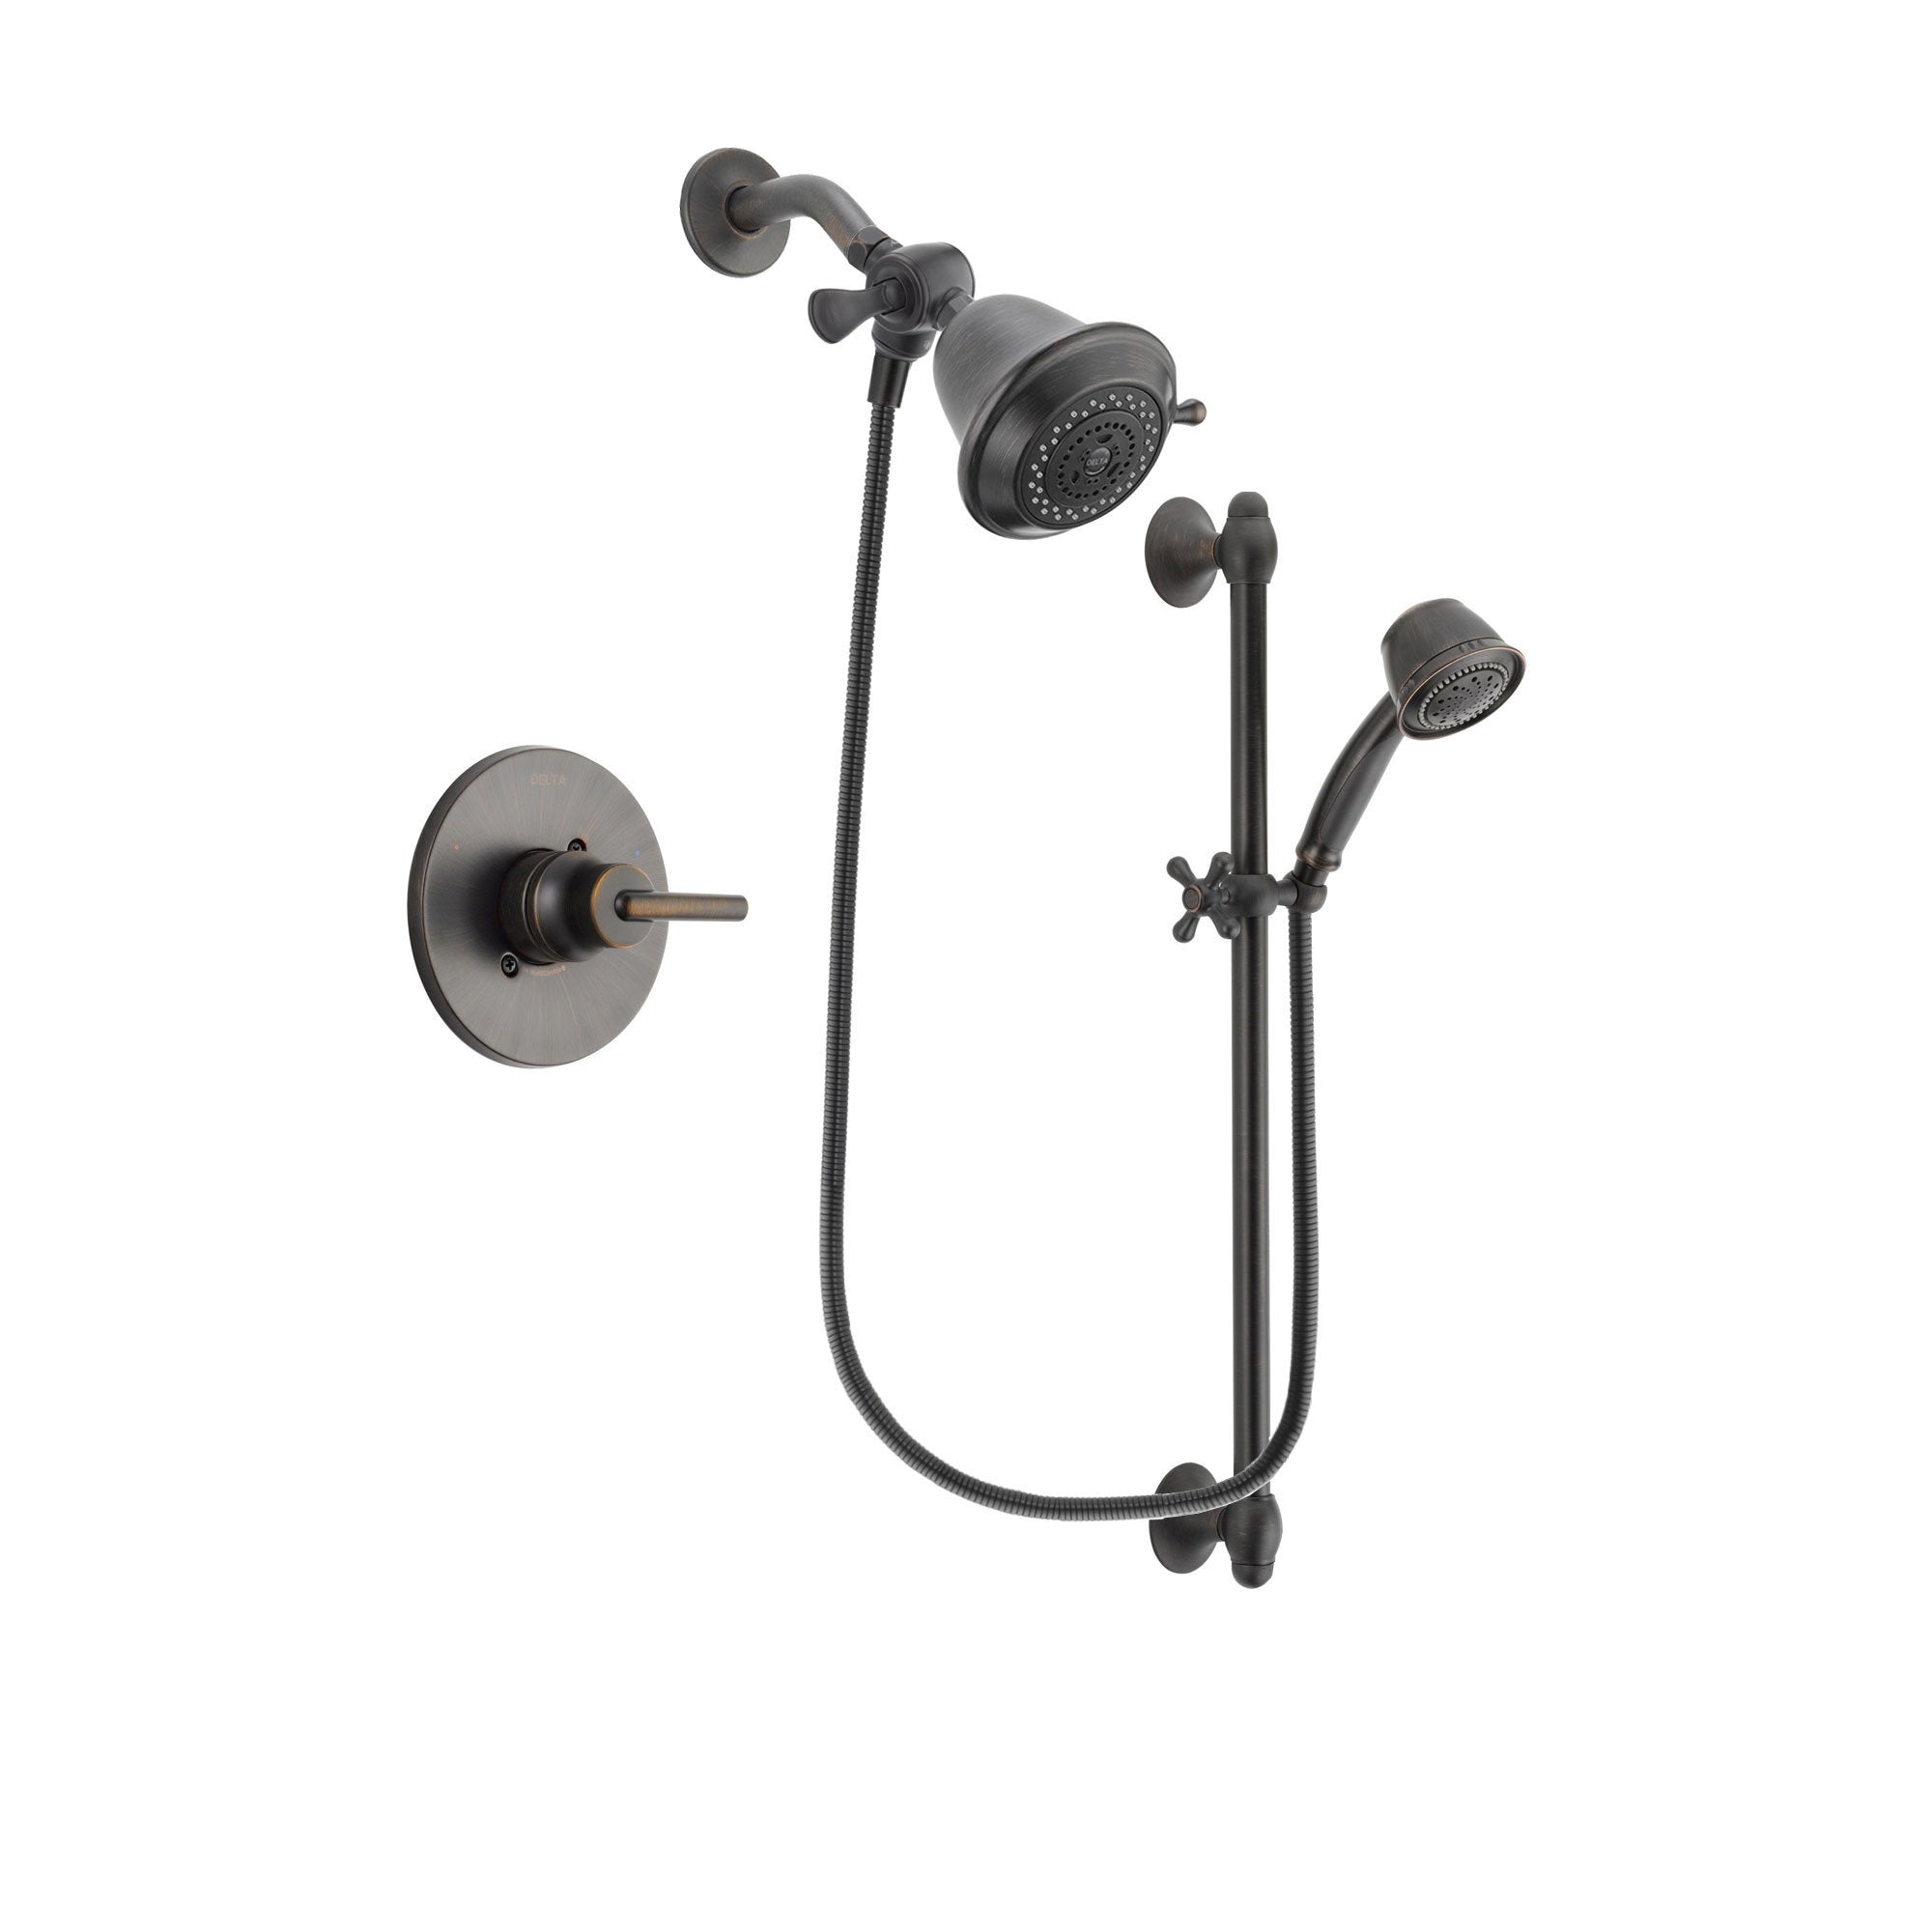 Delta Trinsic Venetian Bronze Finish Shower Faucet System Package with Shower Head and 5-Spray Personal Handshower with Slide Bar Includes Rough-in Valve DSP2514V